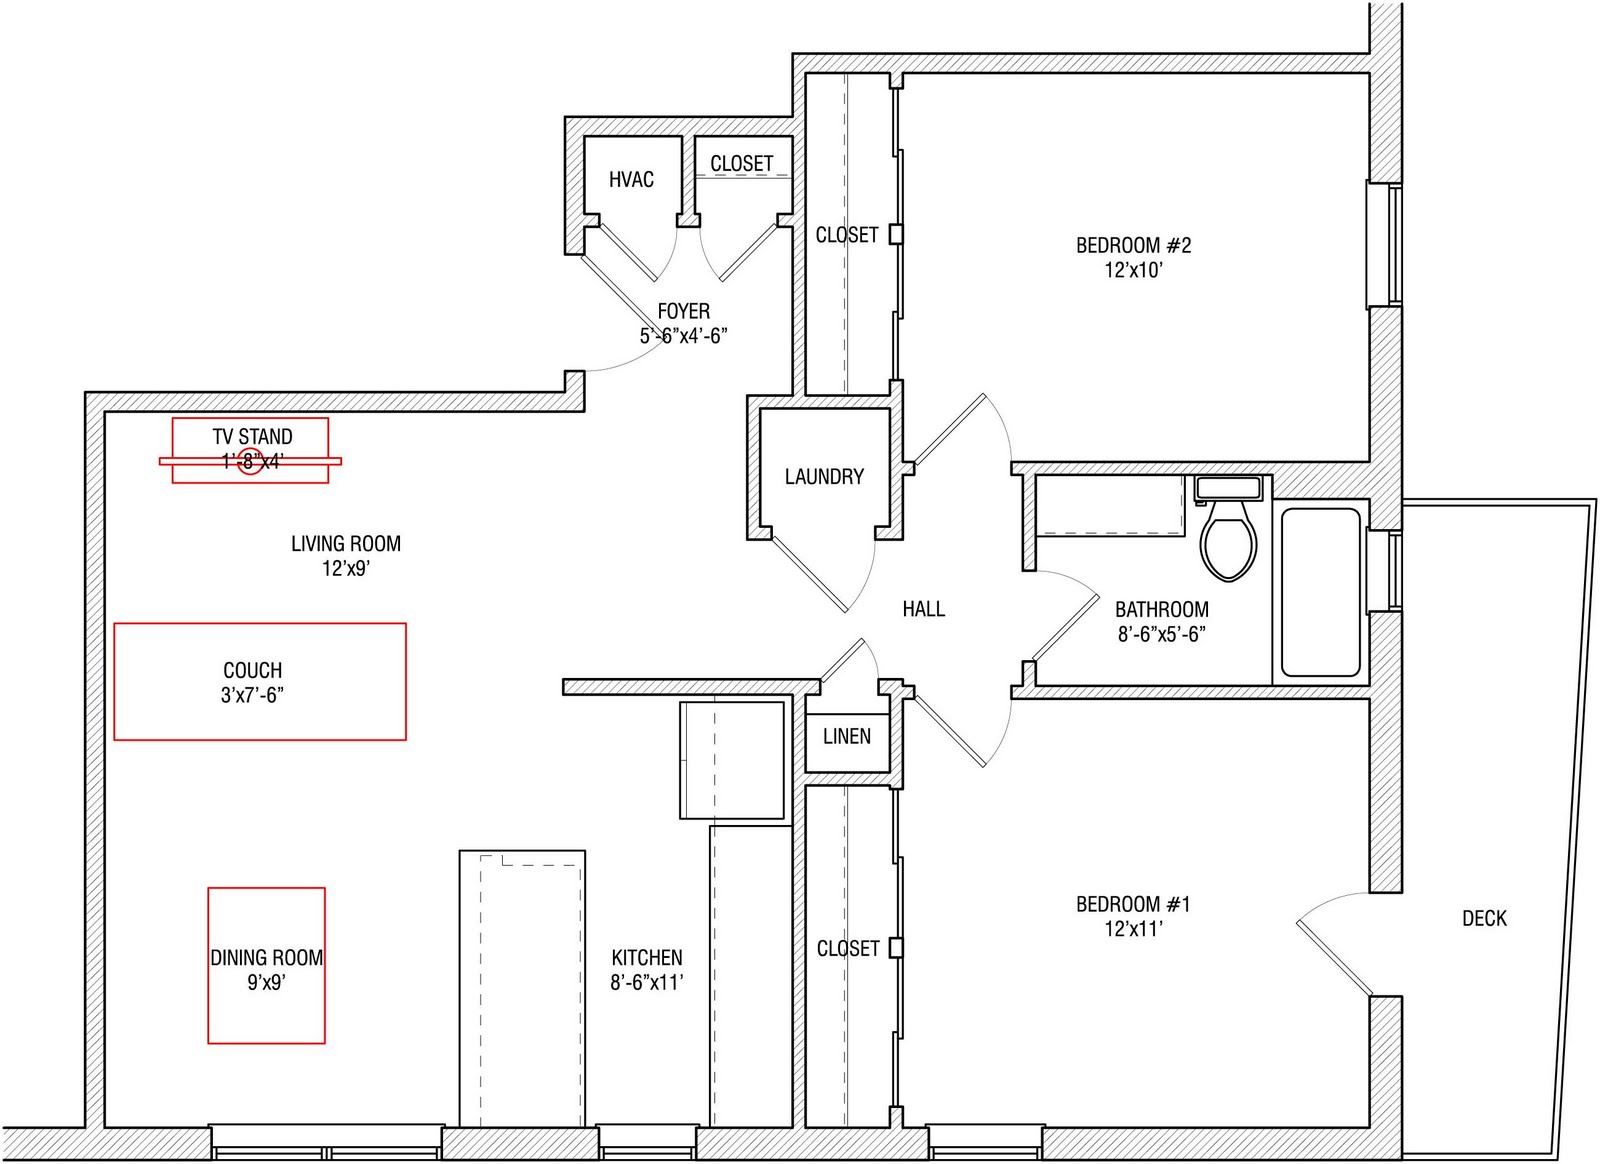 Apartment Drawing Plans